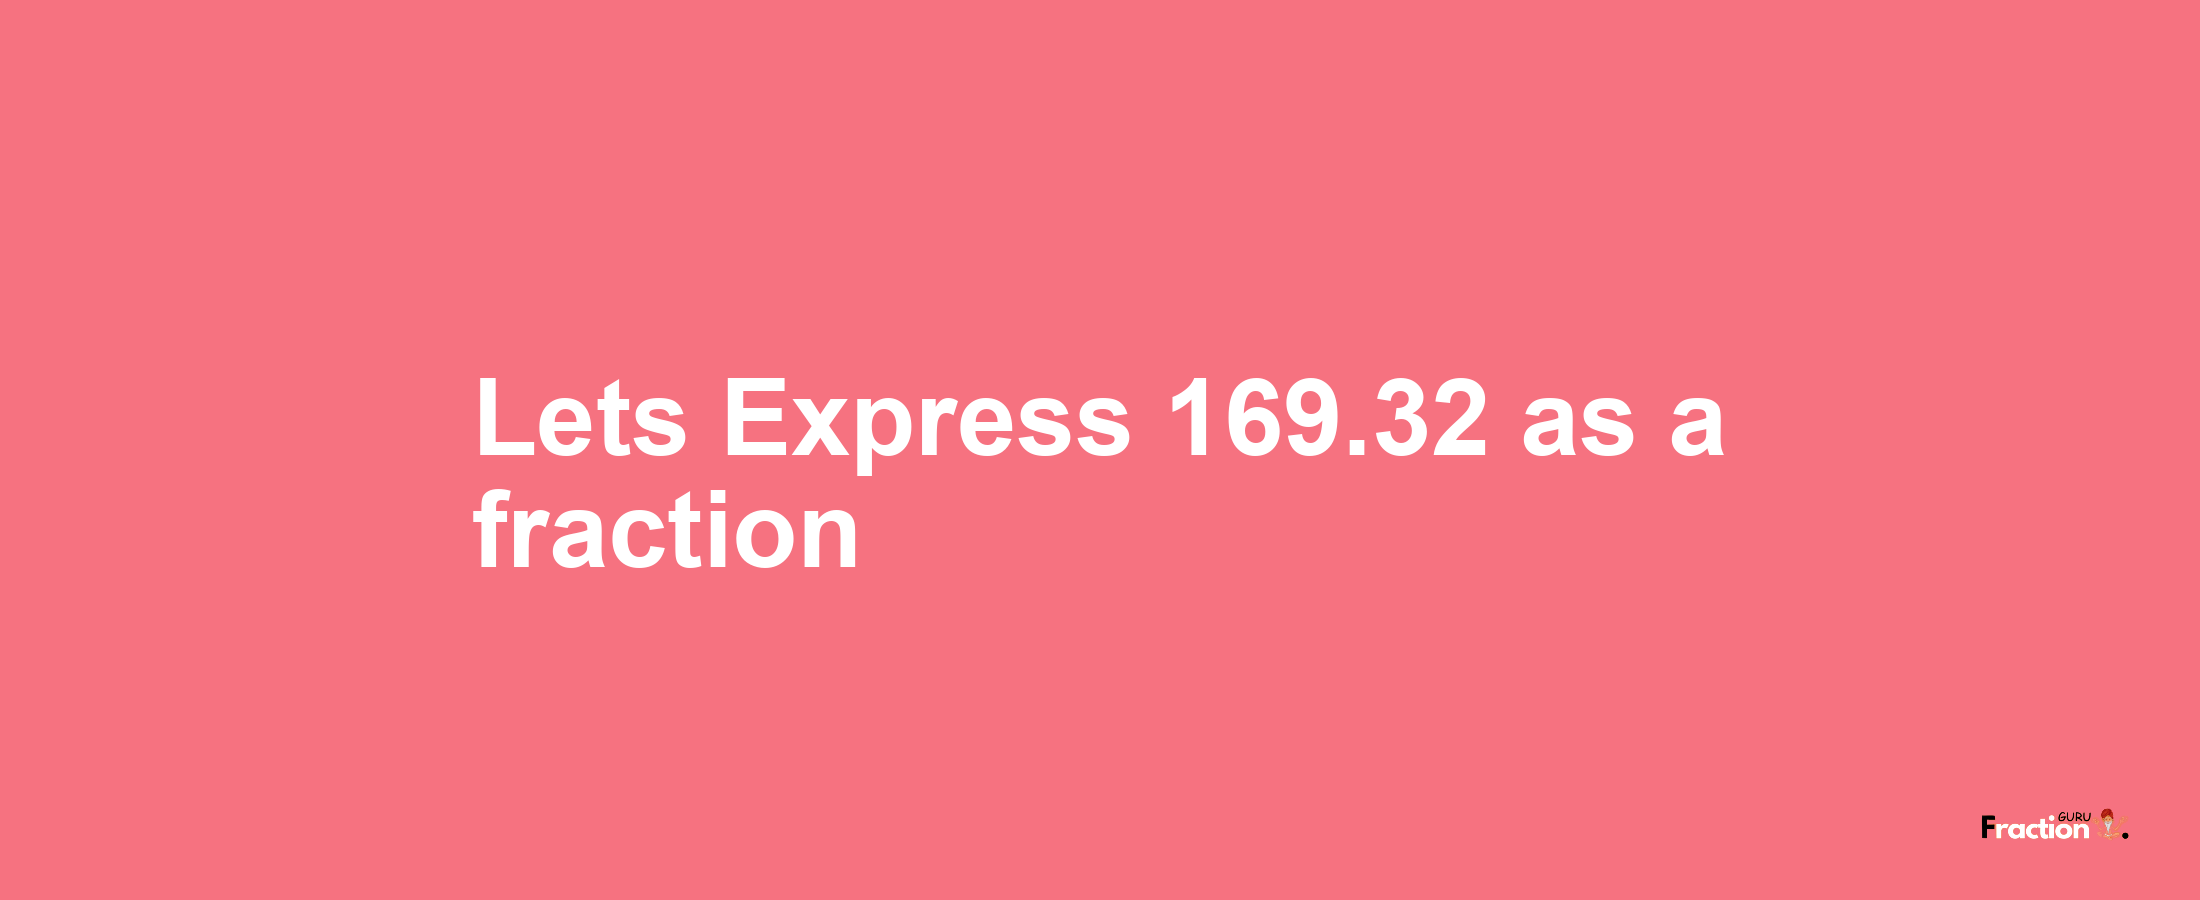 Lets Express 169.32 as afraction